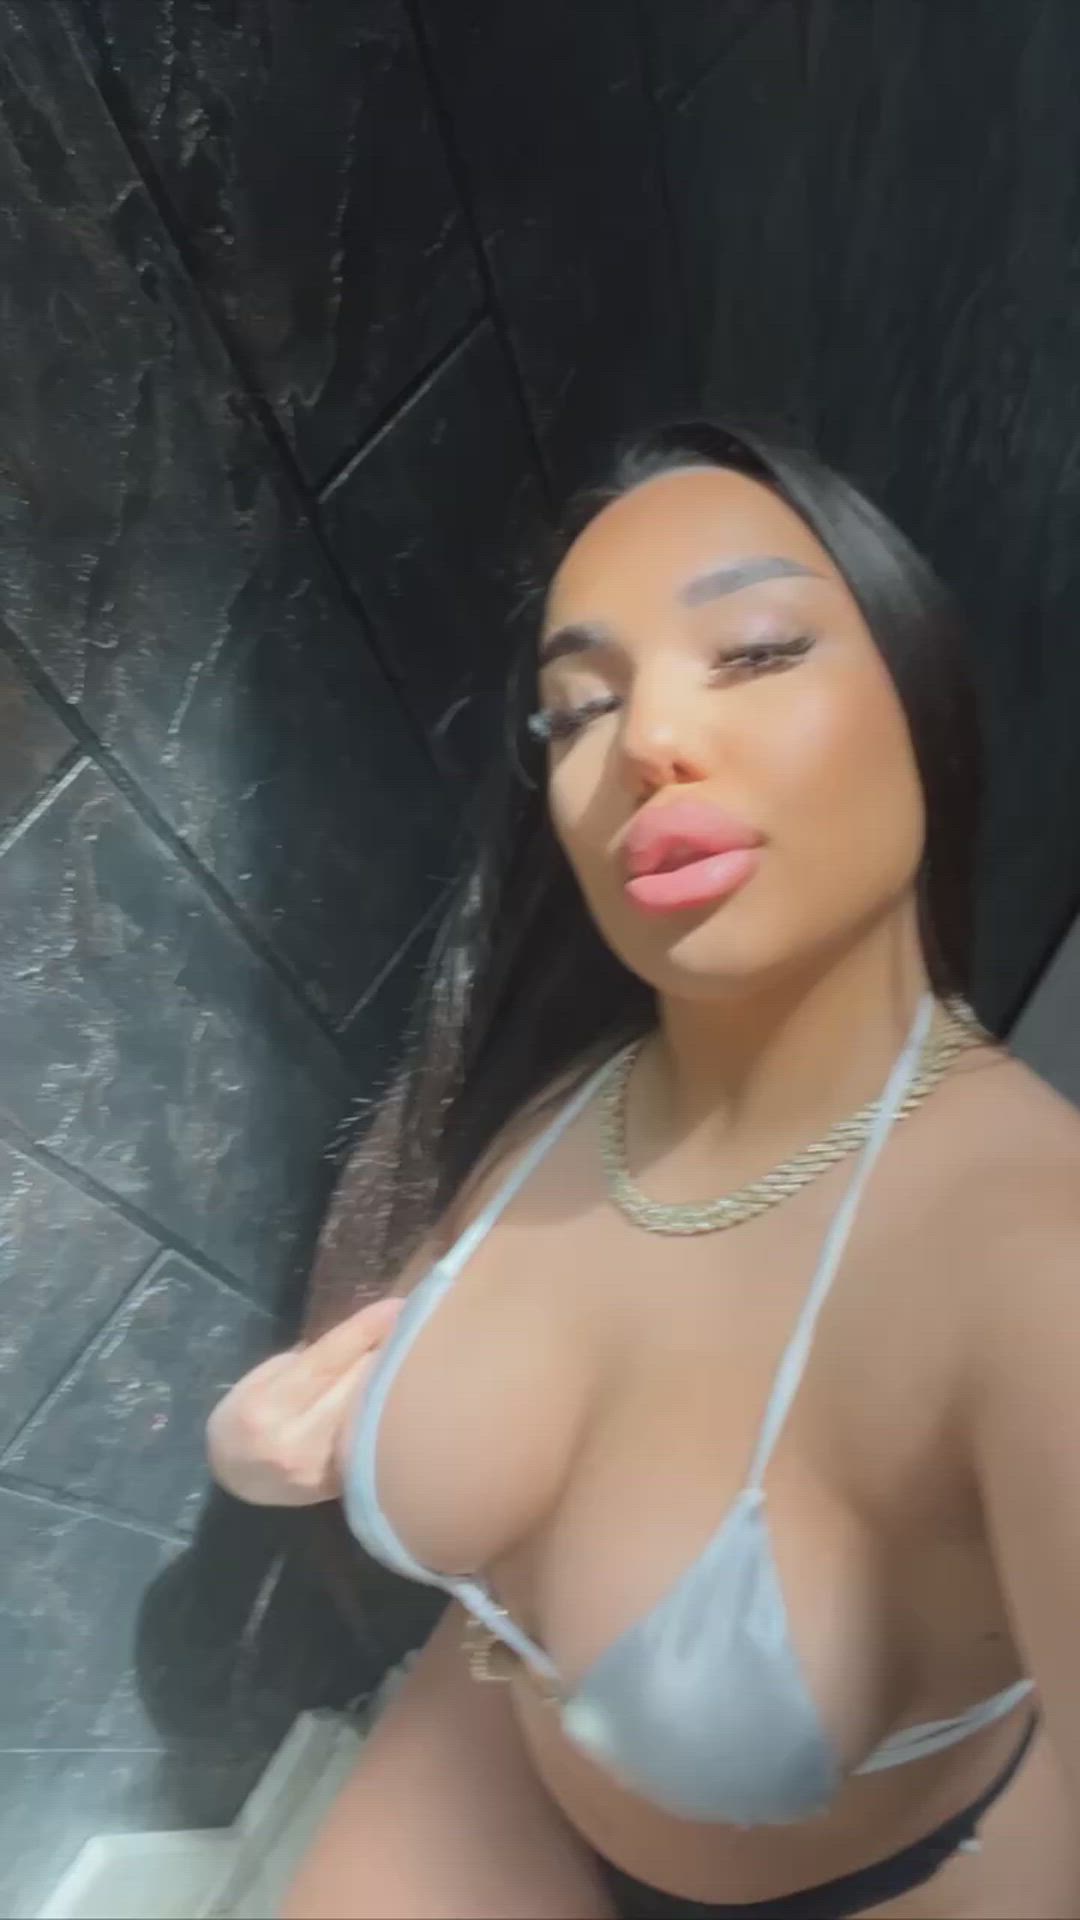 Big Tits porn video with onlyfans model bustynaty <strong>@bustynaty</strong>